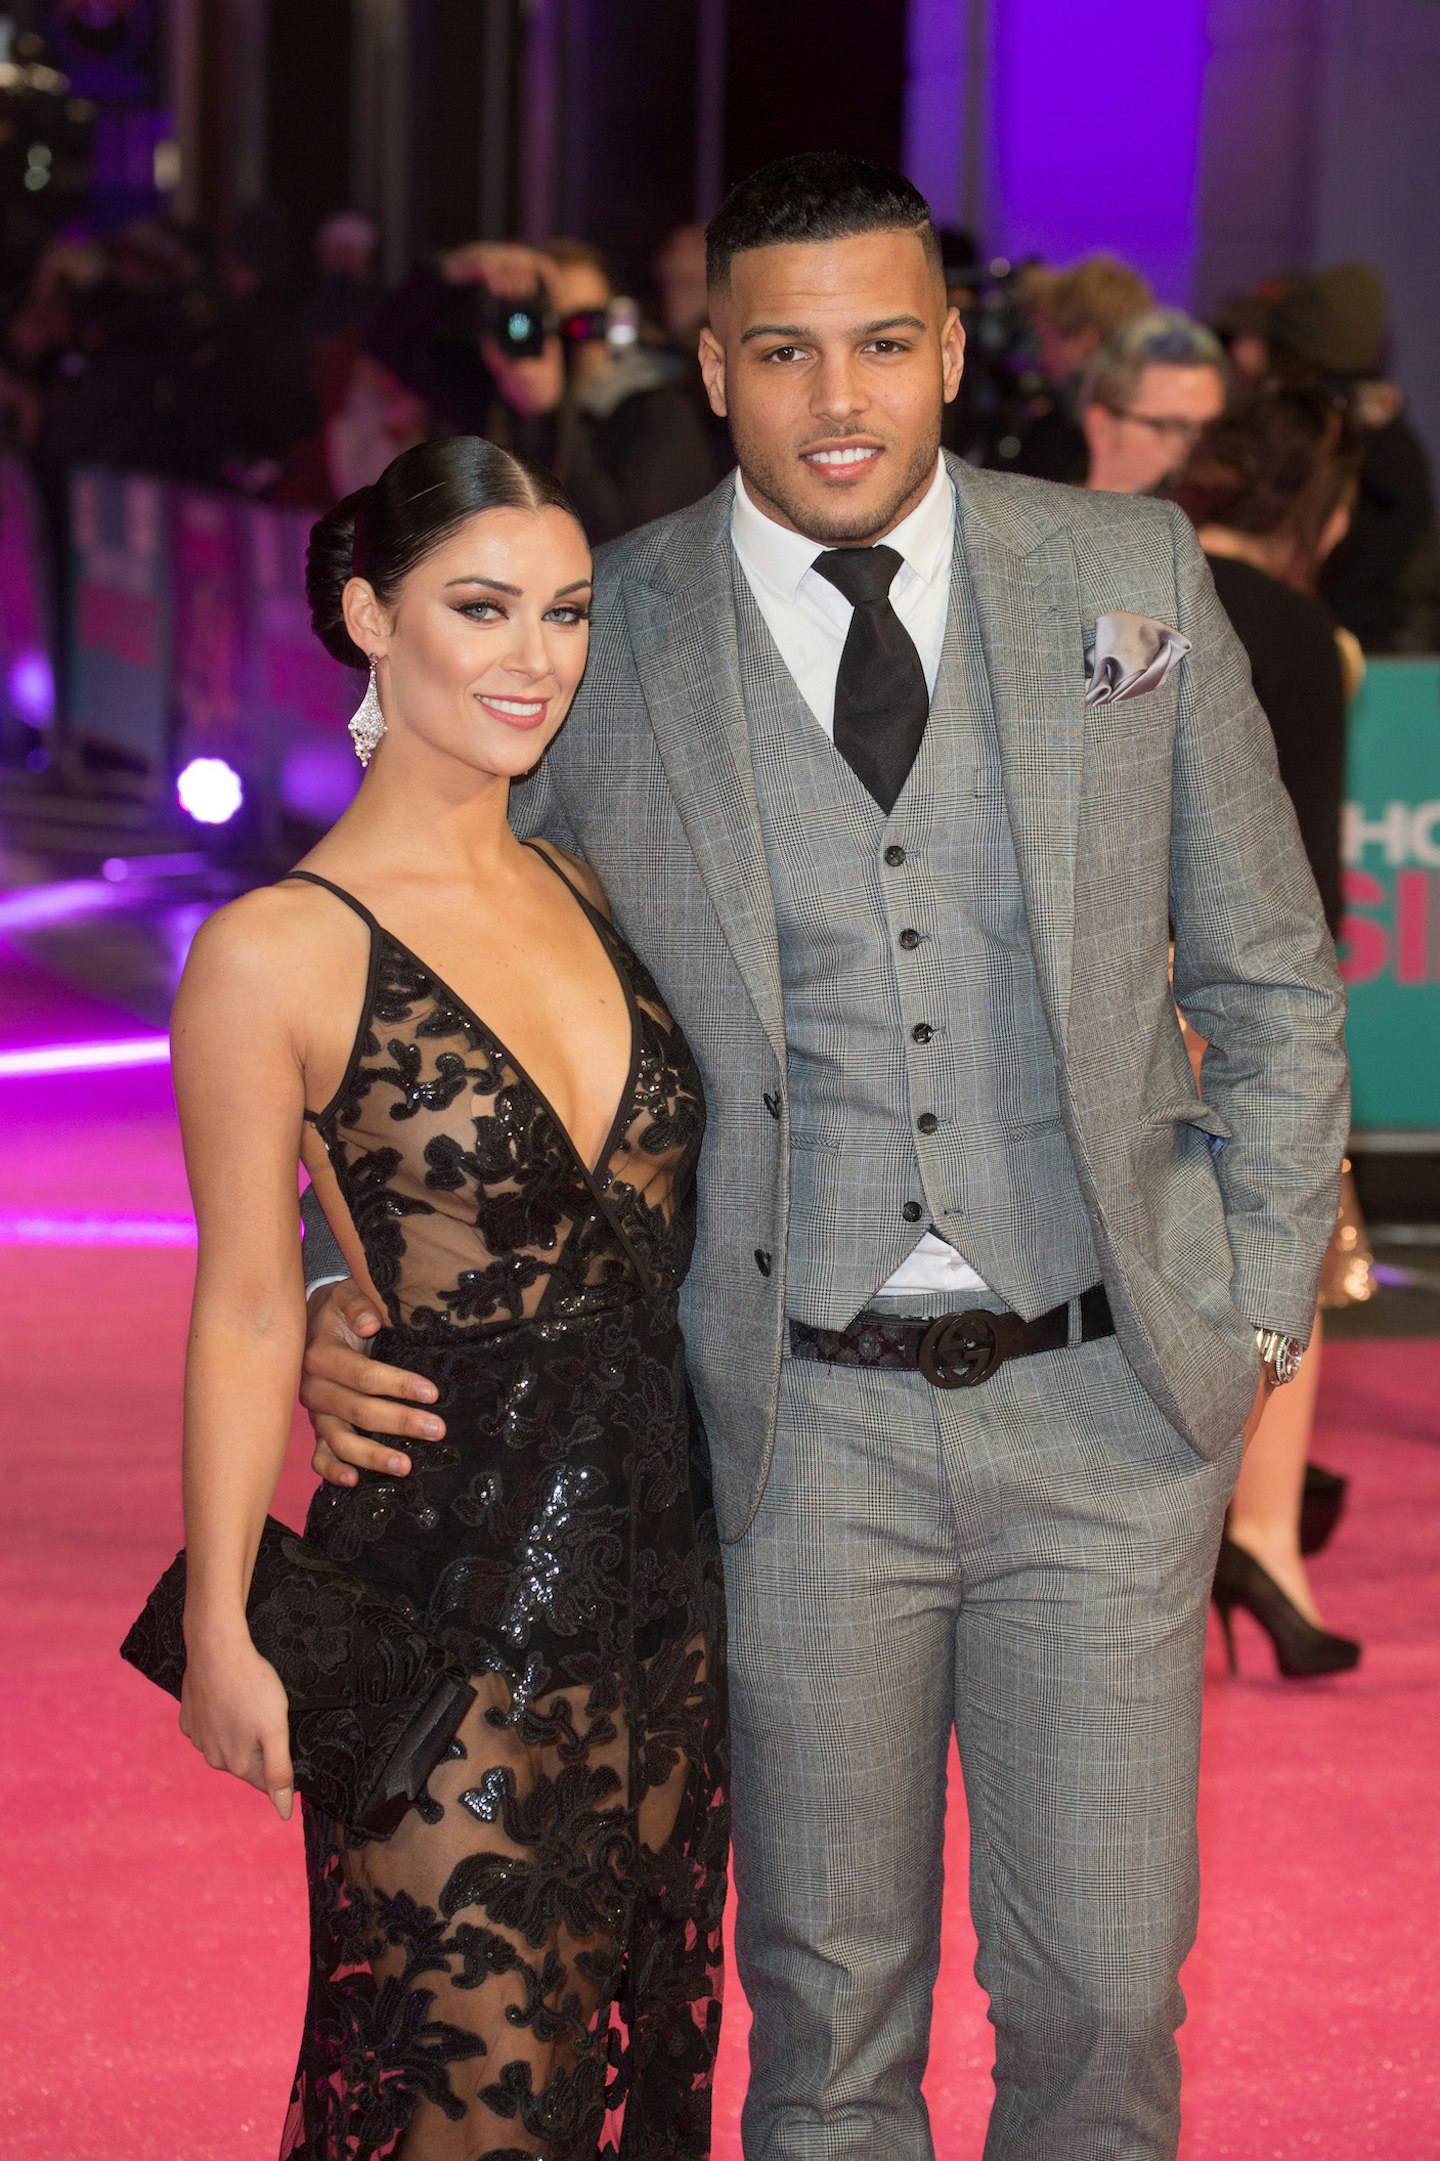 Cally Jane Beech and Luis Morrison